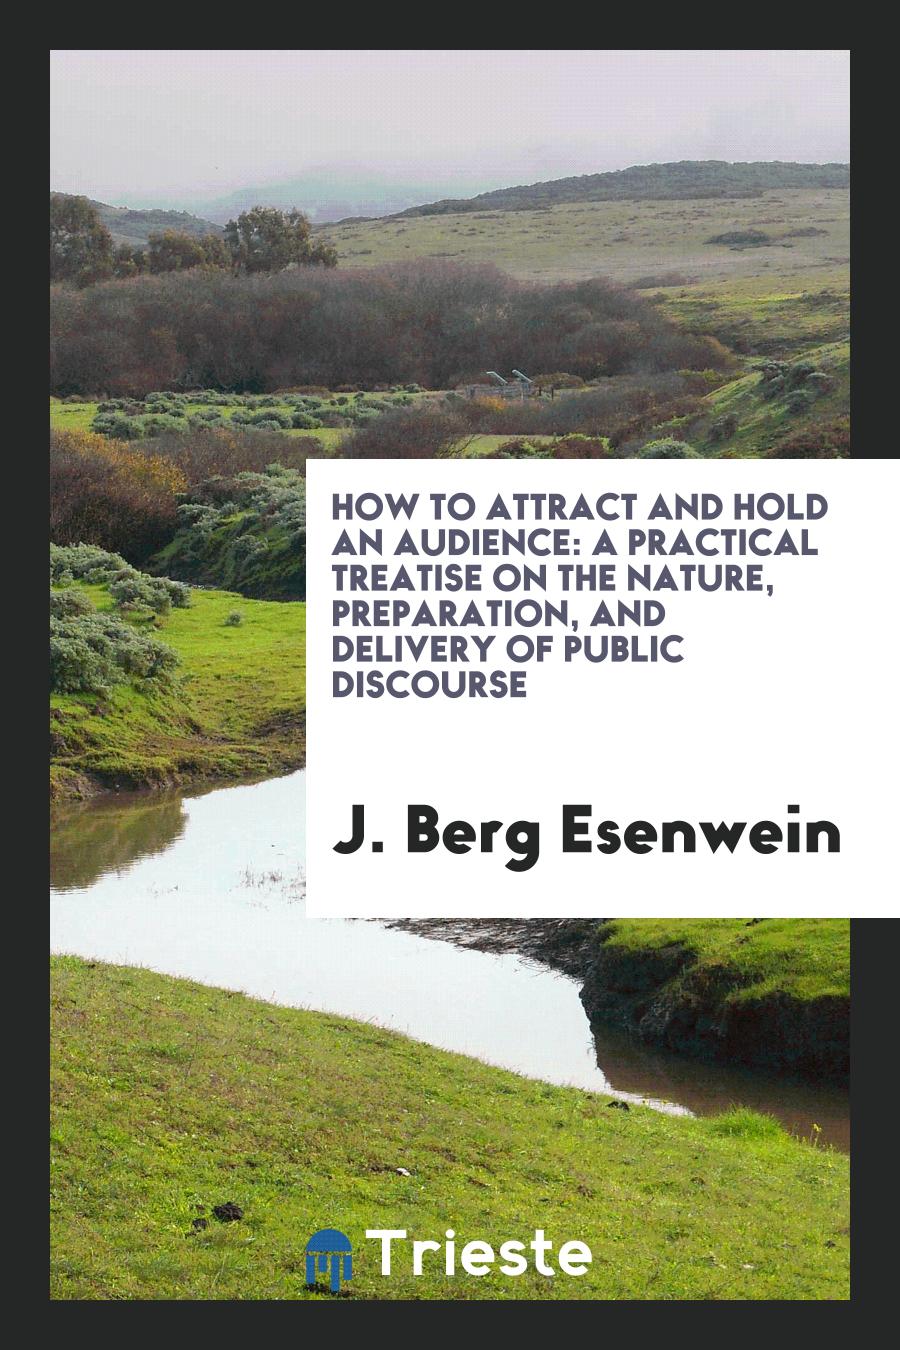 How to Attract and Hold an Audience: A Practical Treatise on the Nature, Preparation, and Delivery of Public Discourse